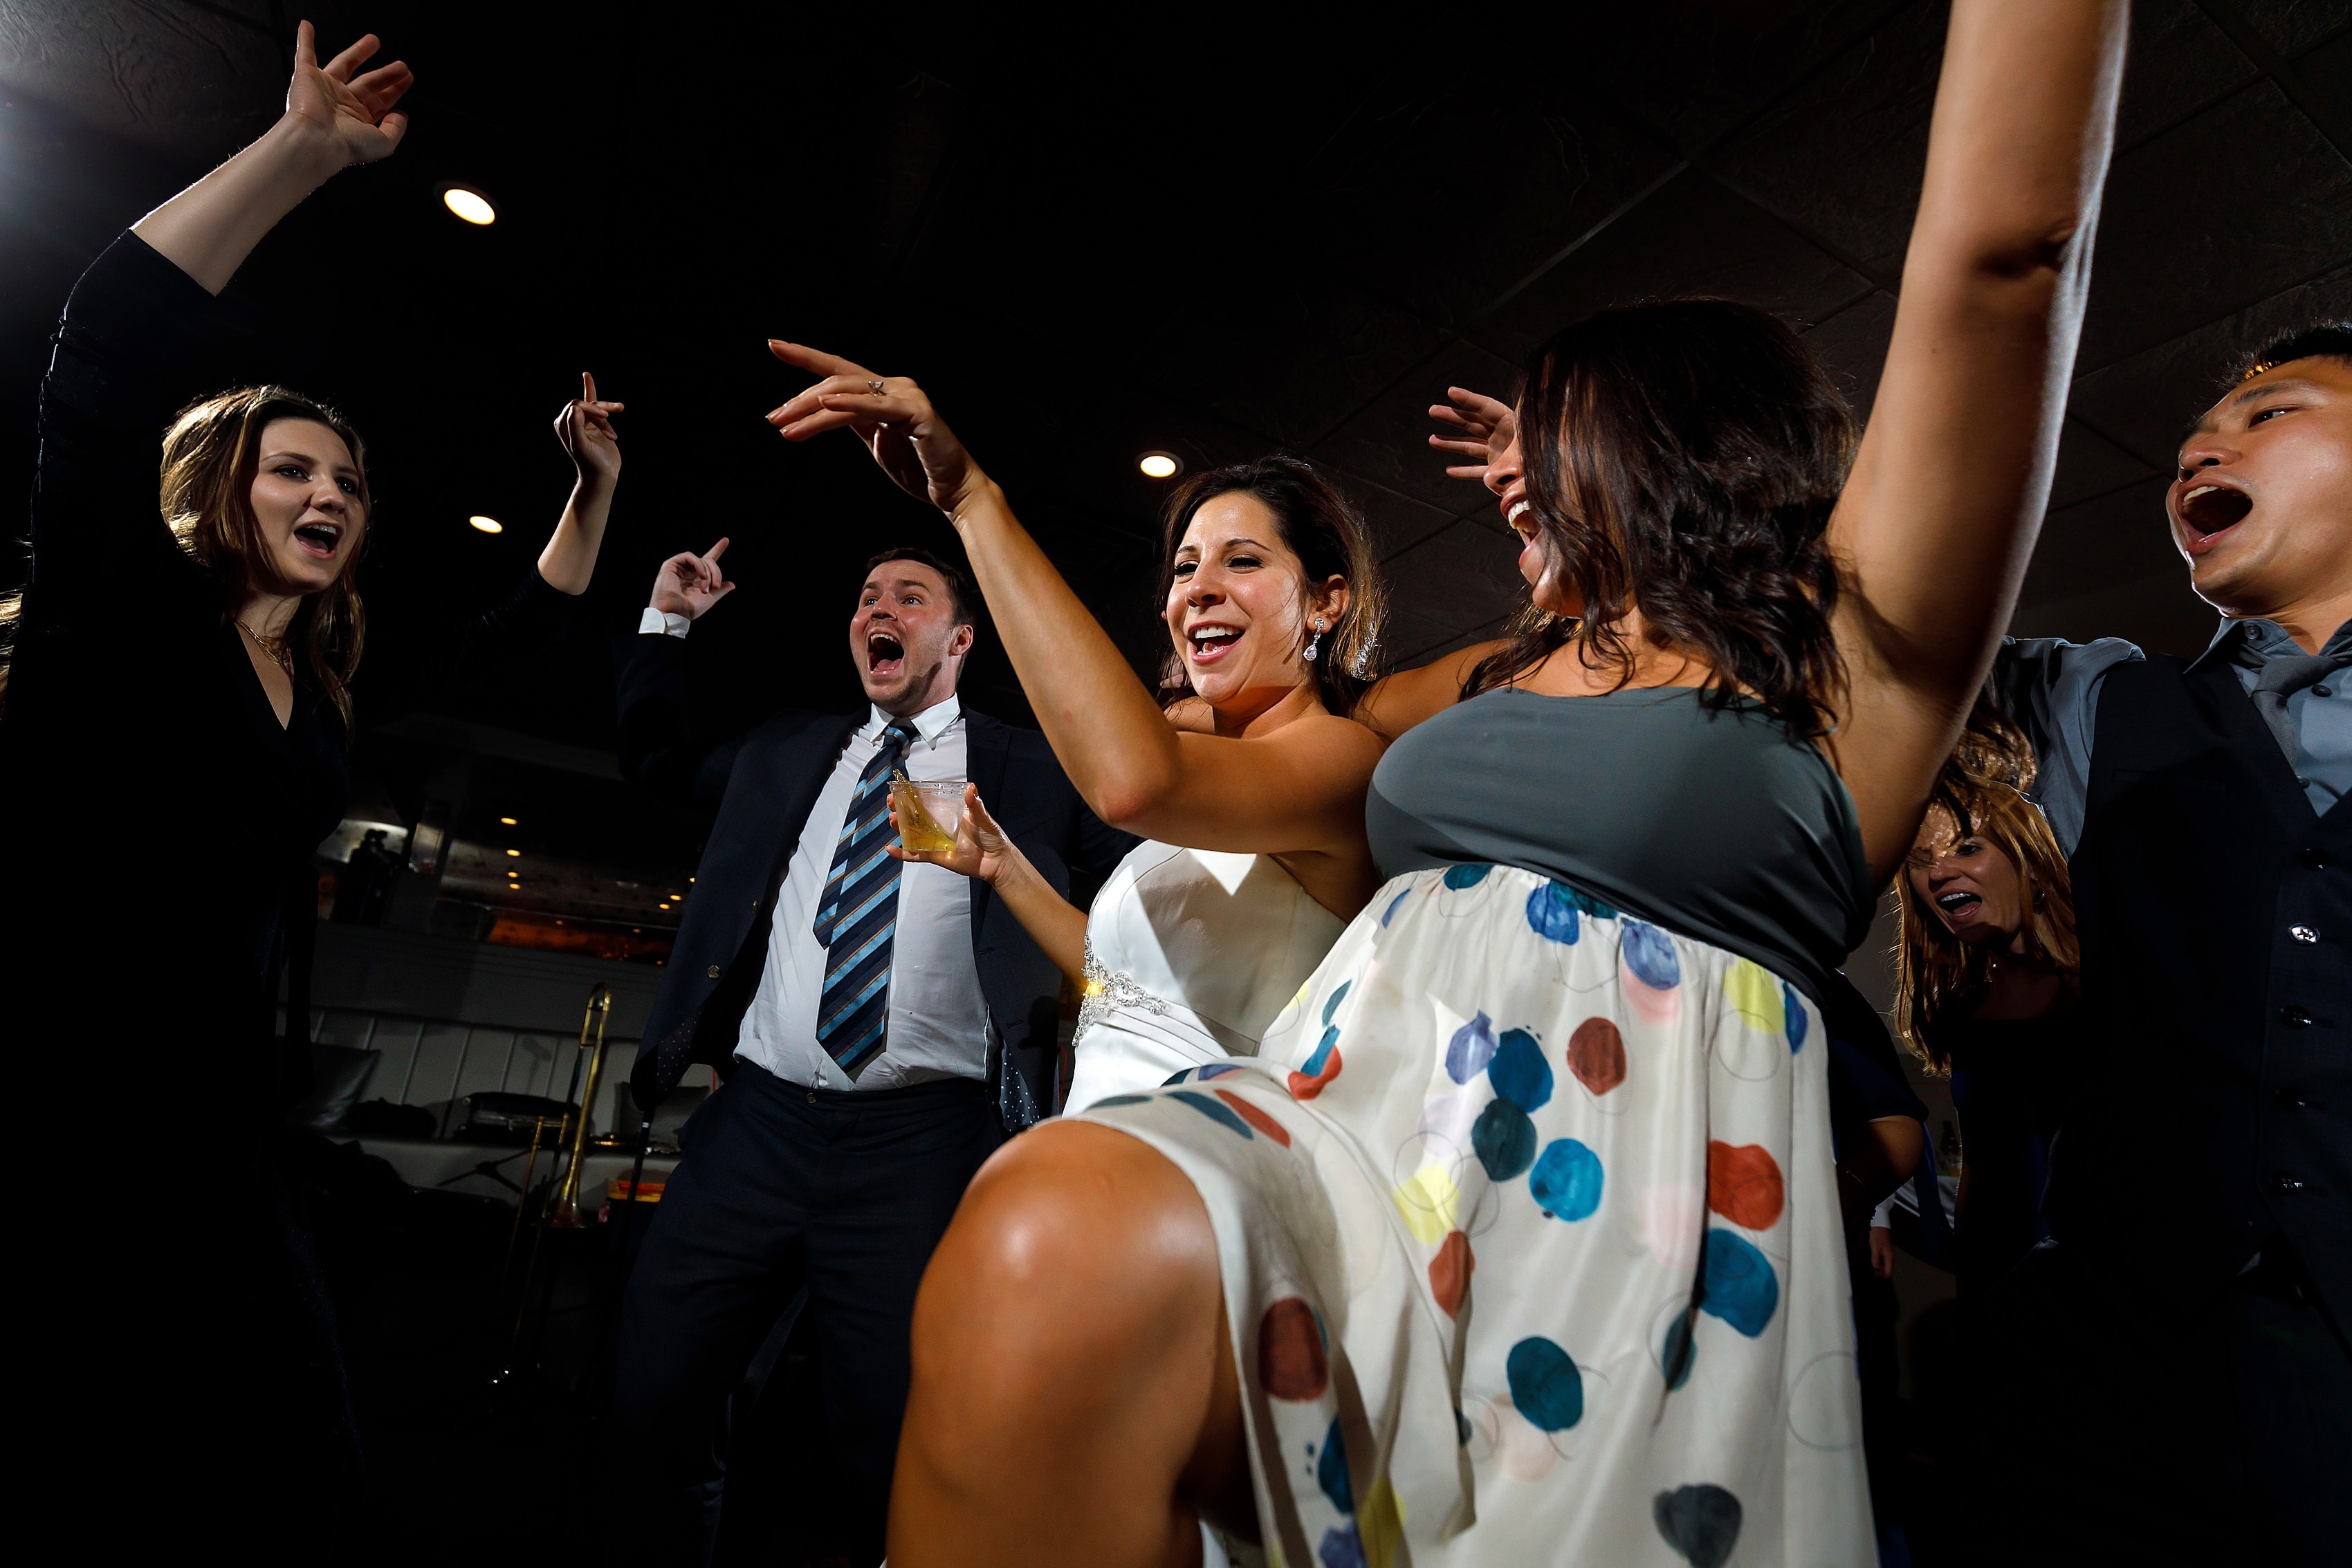 wedding guests dance during wedding reception at Pazzo's at Three-Eleven in downtown Chicago